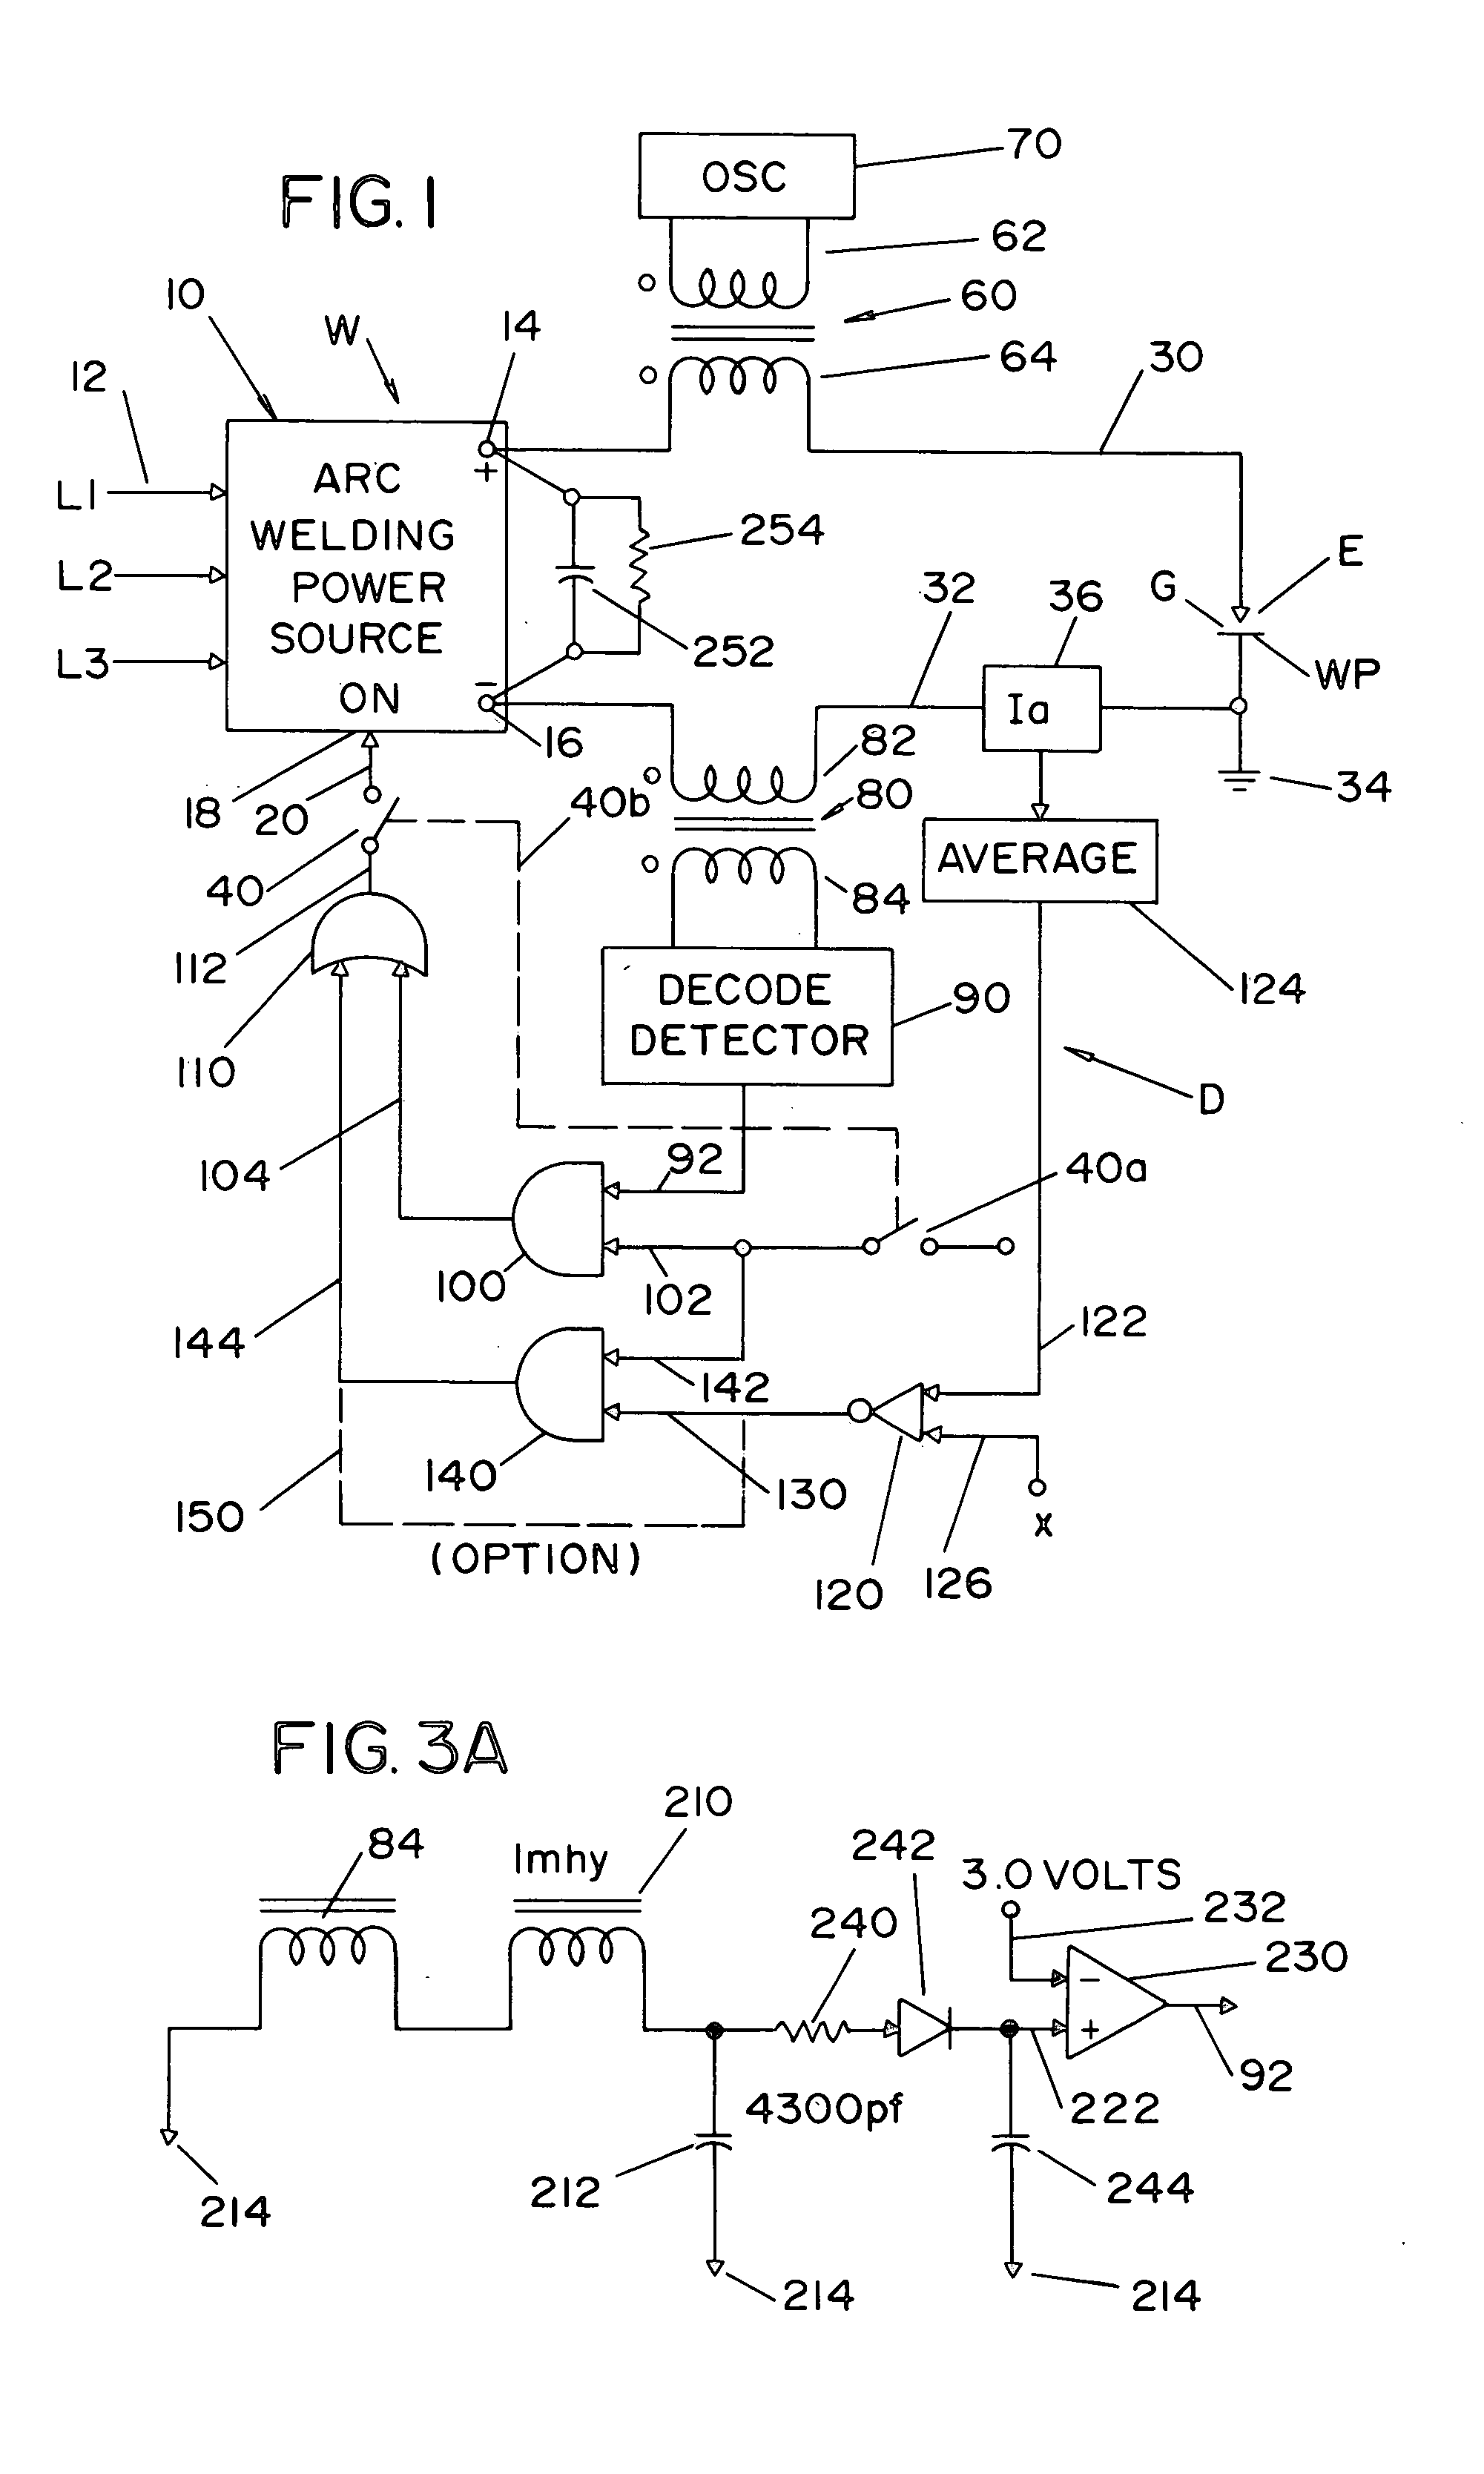 Device to control power source